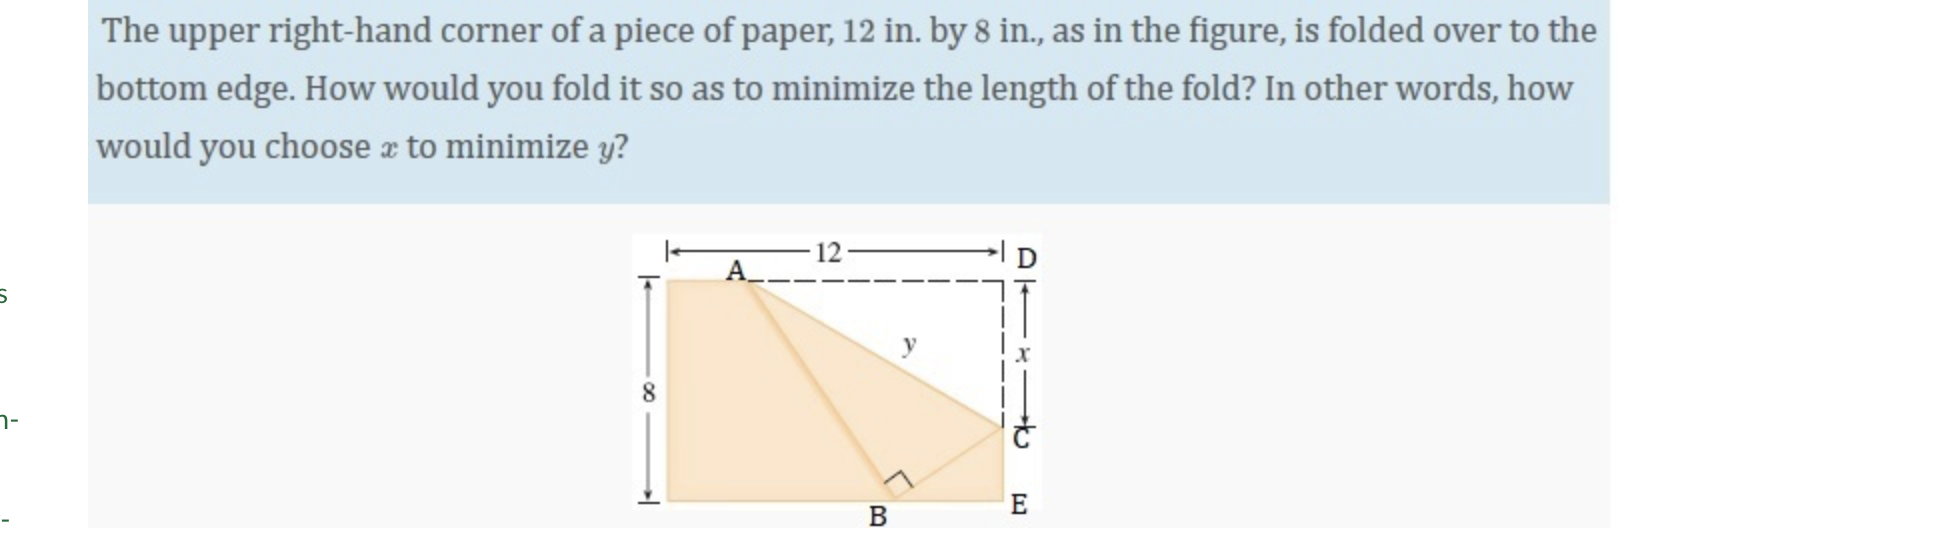 The upper right-hand corner of a piece of paper, 12 in. by 8 in., as in the figure, is folded over to the
bottom edge. How would you fold it so as to minimize the length of the fold? In other words, how
would you choose æ to minimize y?
